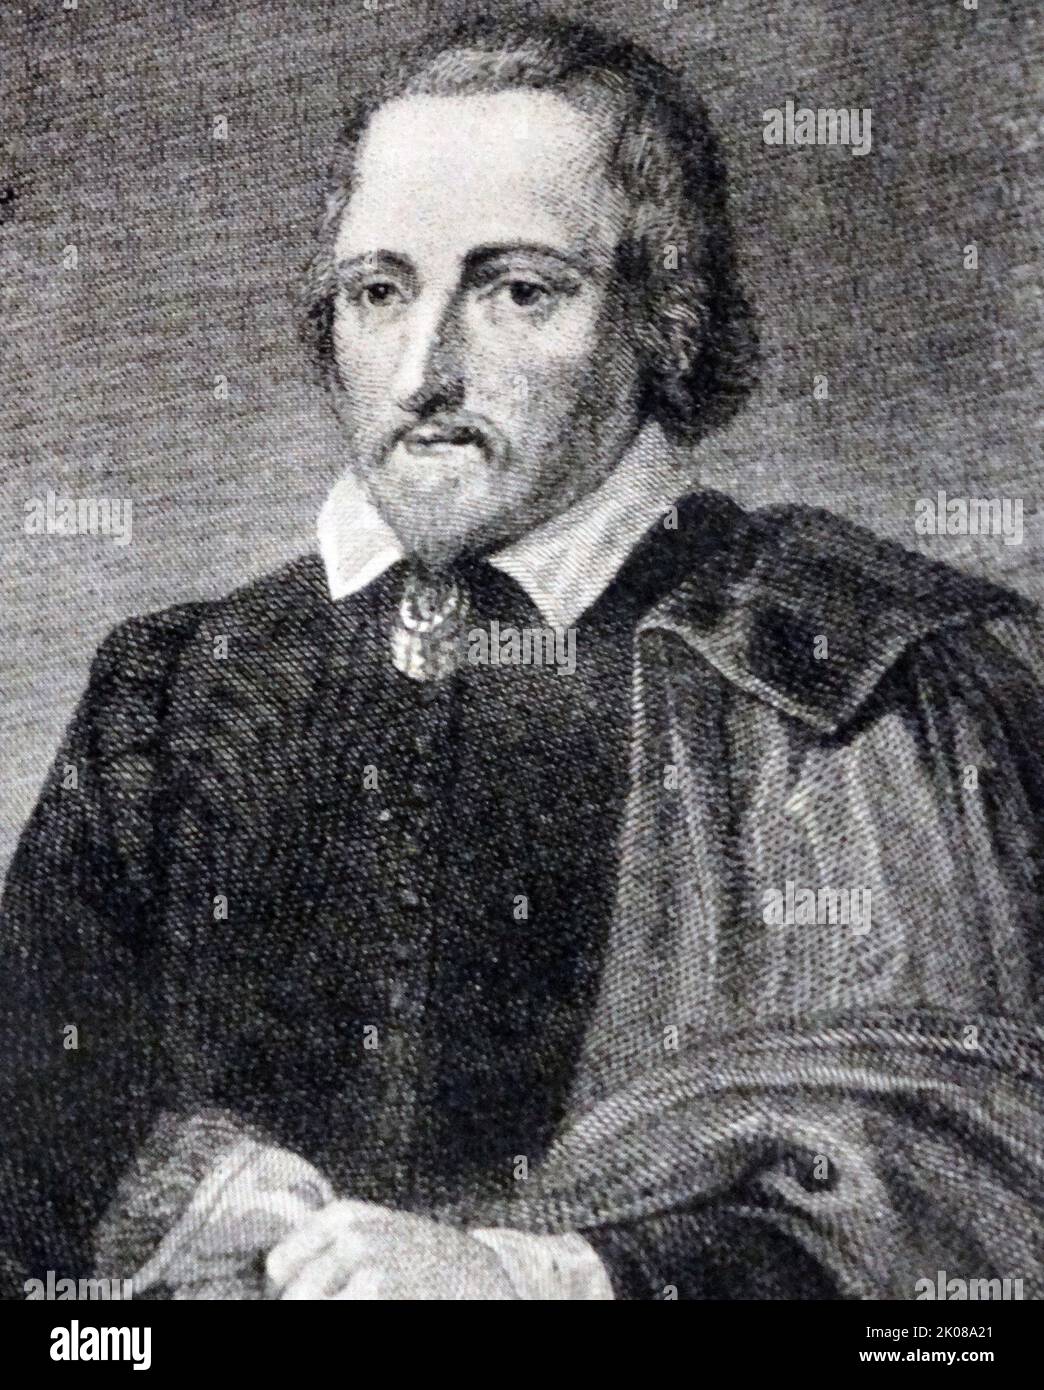 Philip Massinger (1583 - 17 March 1640) was an English dramatist. His finely plotted plays, including A New Way to Pay Old Debts, The City Madam, and The Roman Actor, are noted for their satire and realism, and their political and social themes Stock Photo